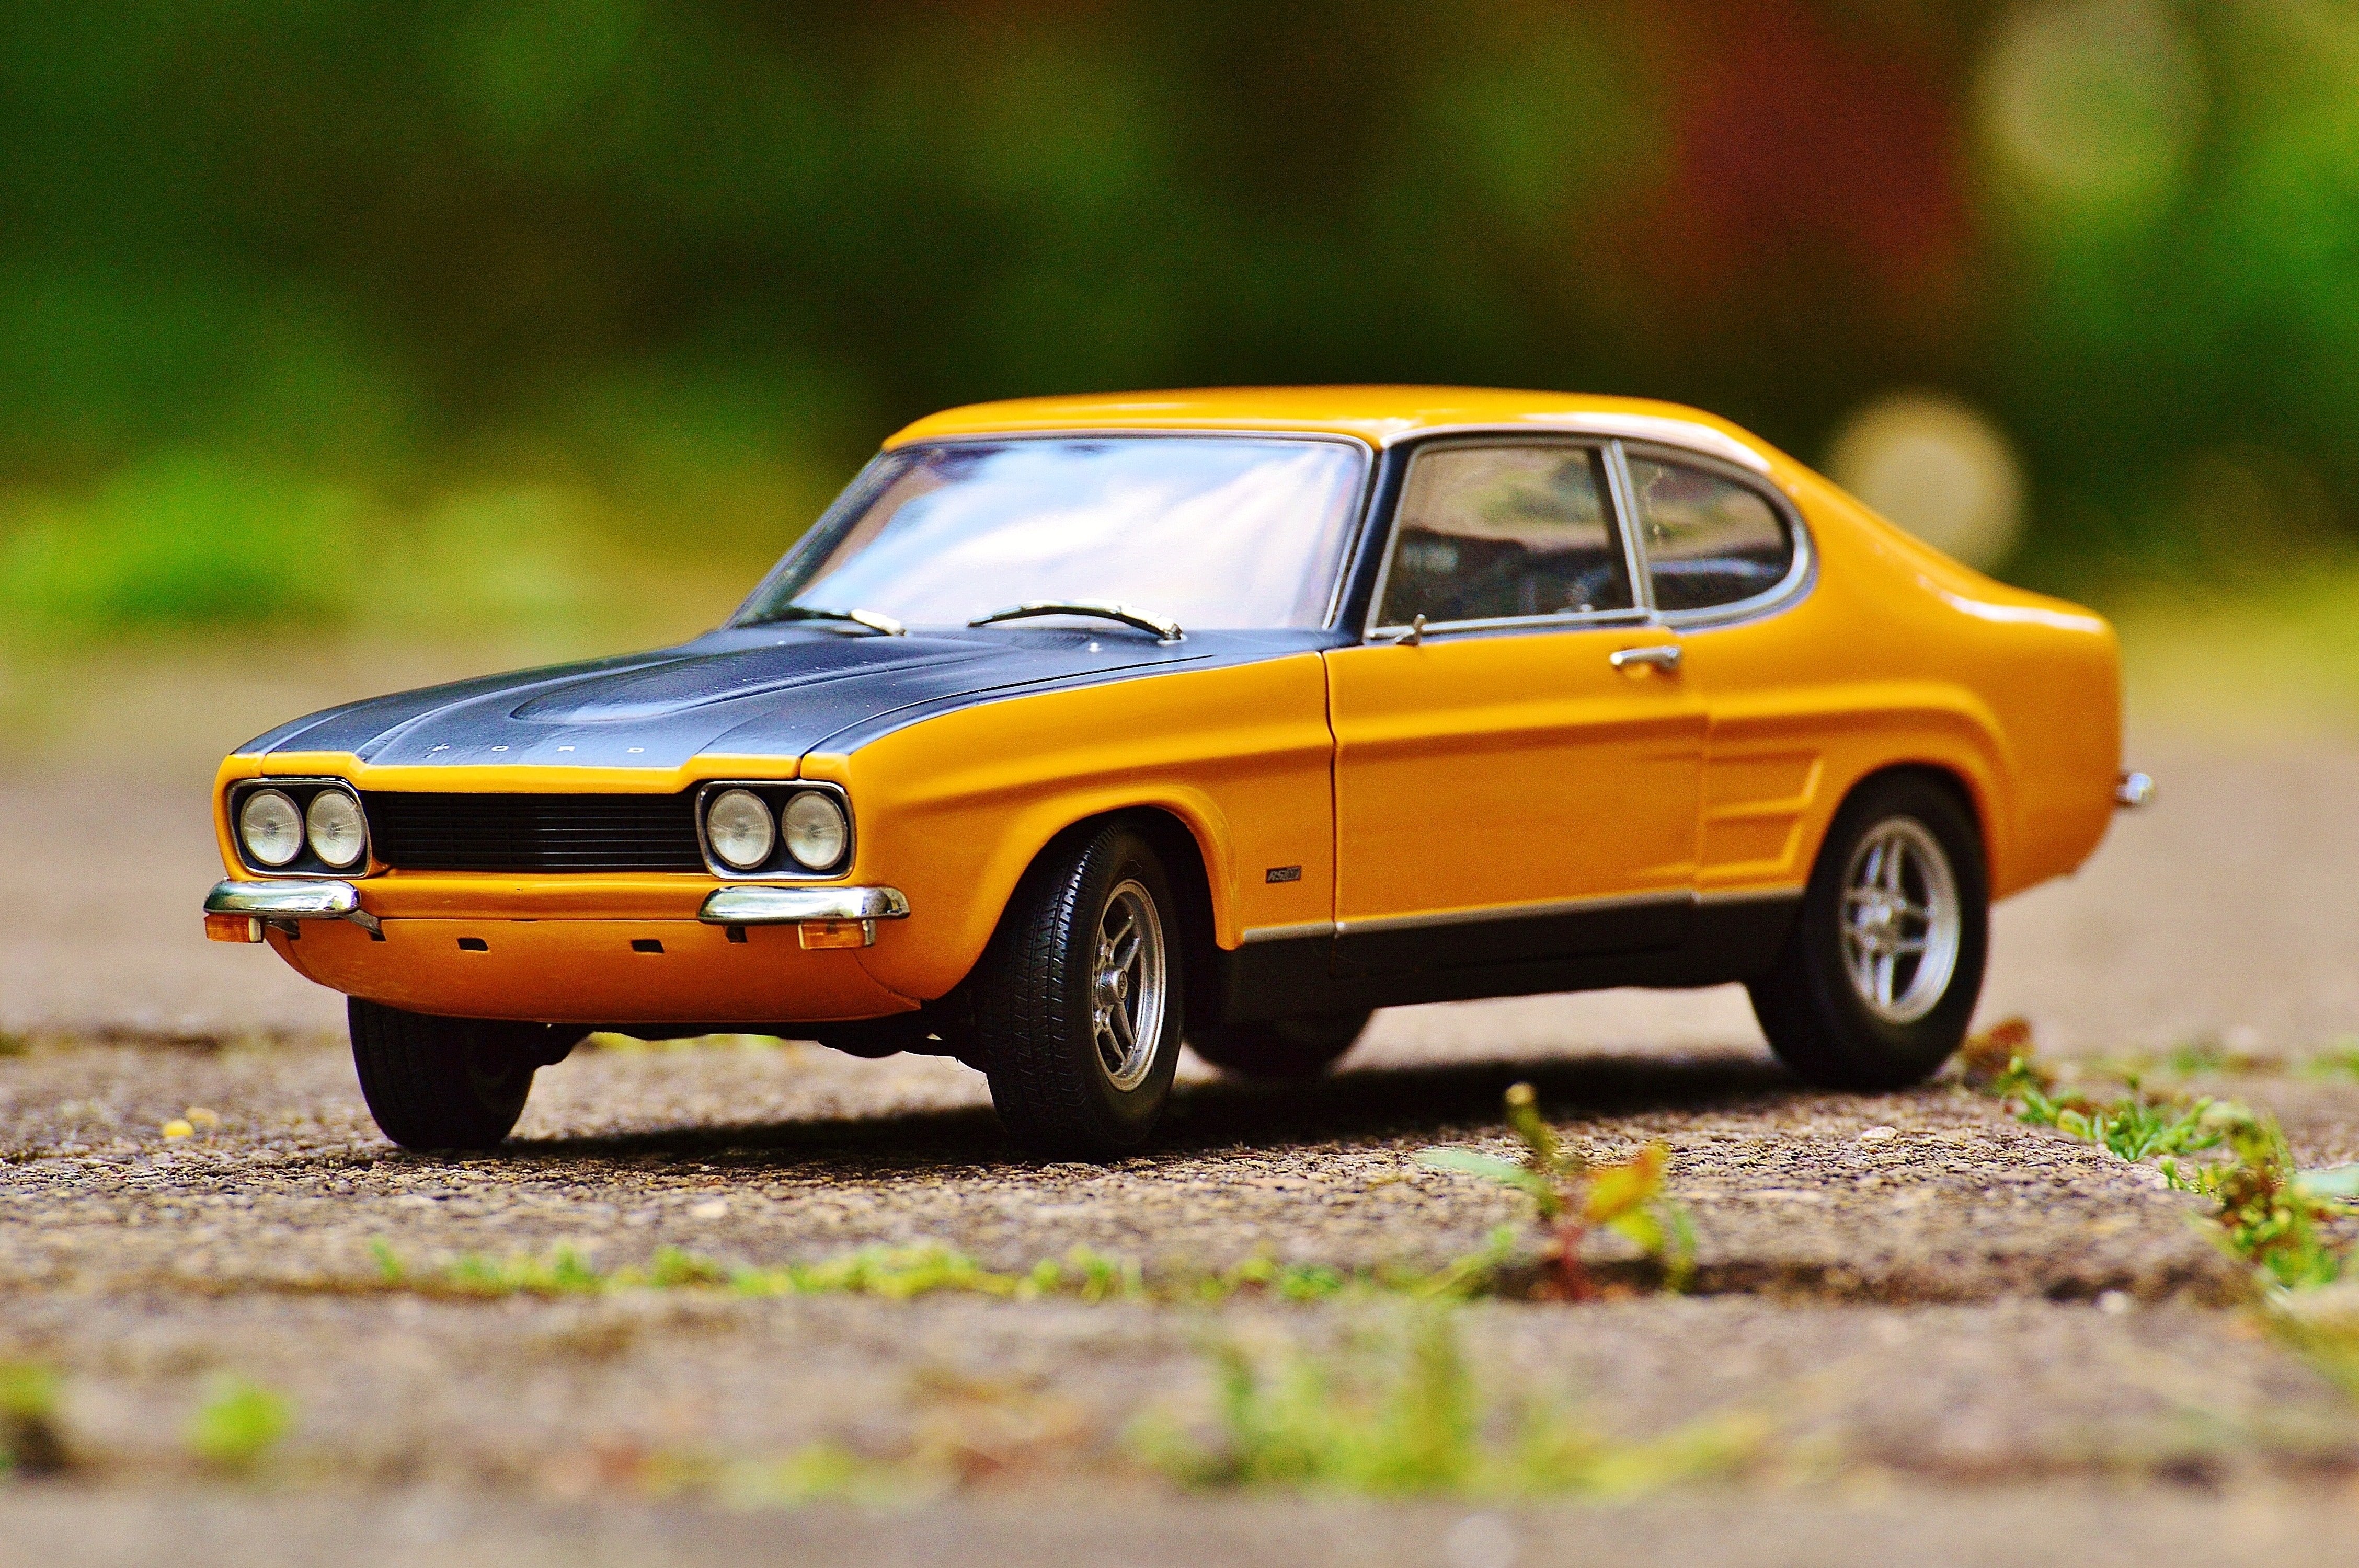 yellow and black classic car diecast scale model